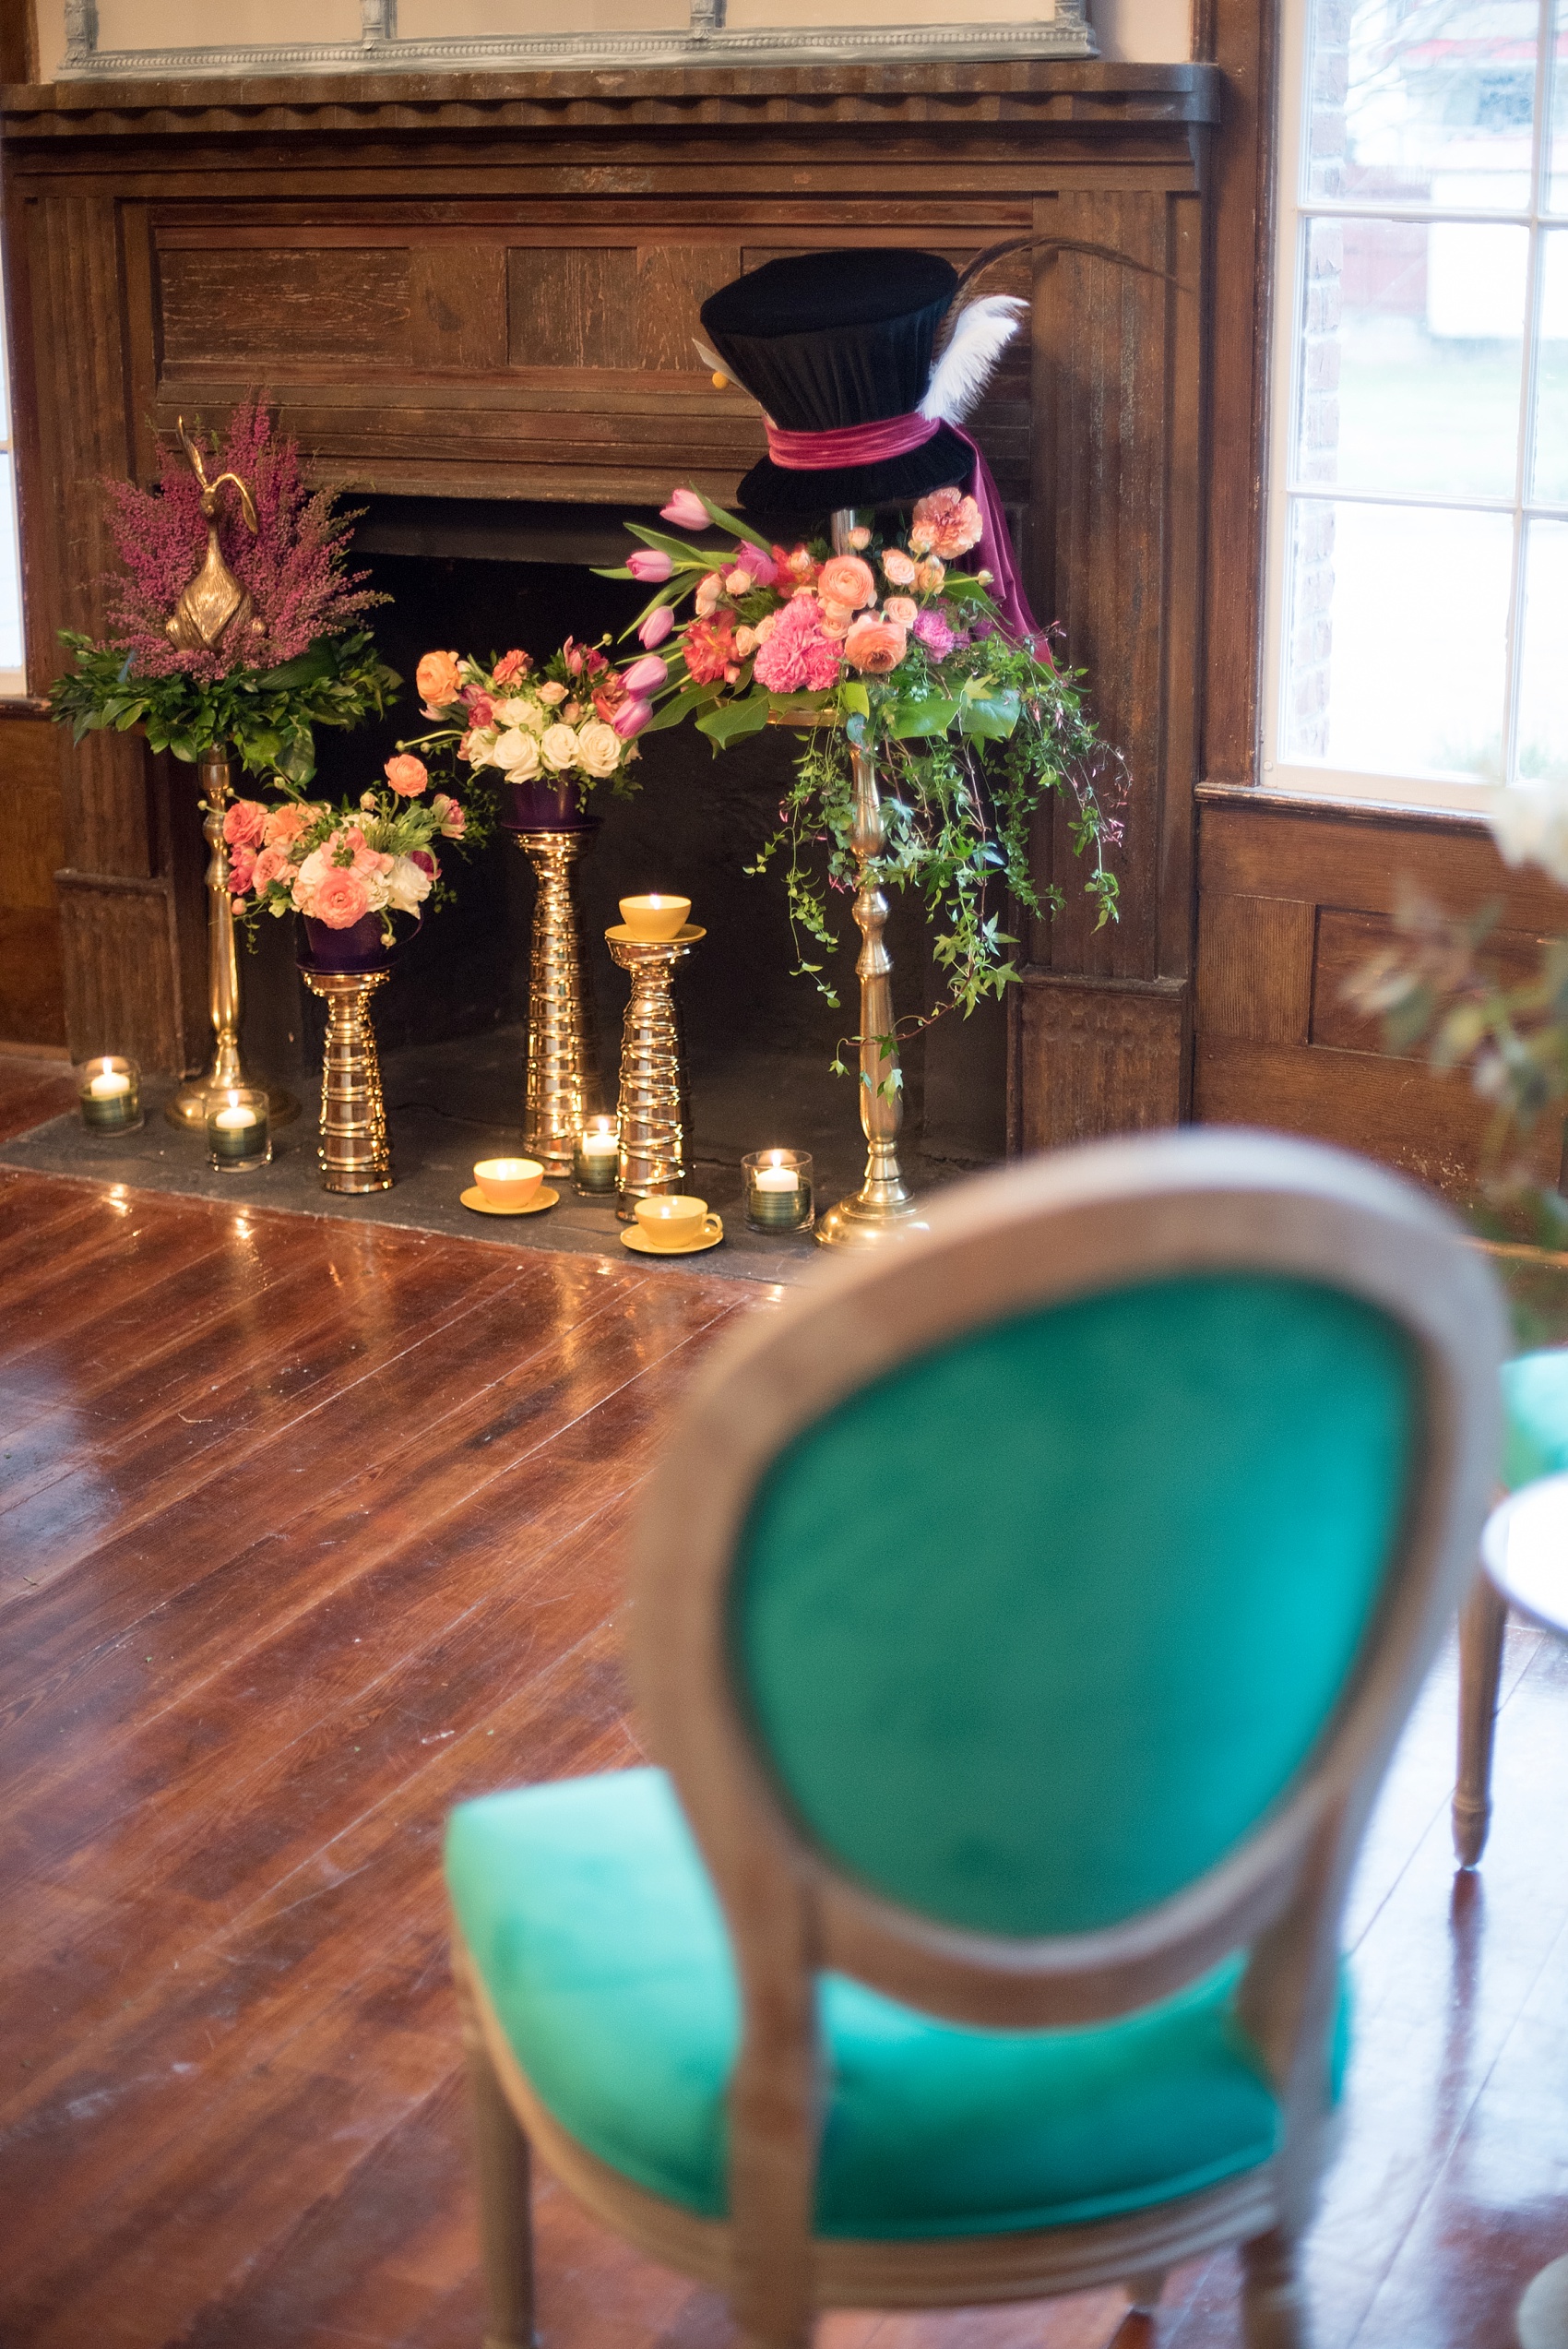 Raleigh wedding photographer Mikkel Paige captures Mim's House opening night, with an Alice in Wonderland theme including the Mad Hatter.